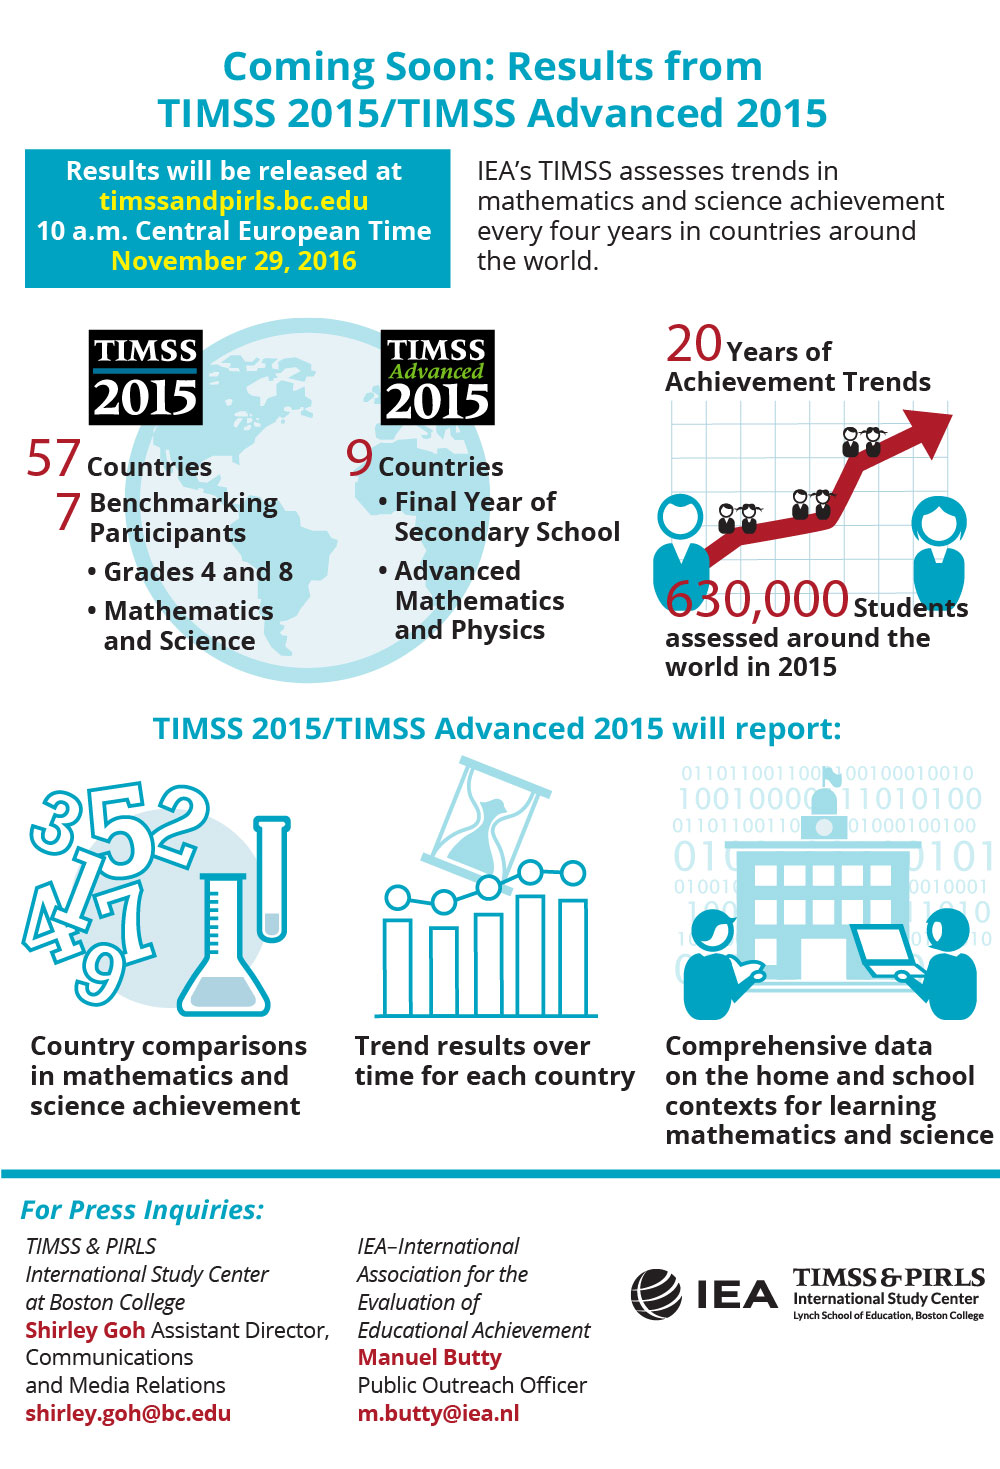 Coming Soon Results From TIMSS 2015 and TIMSS Advanced 2015